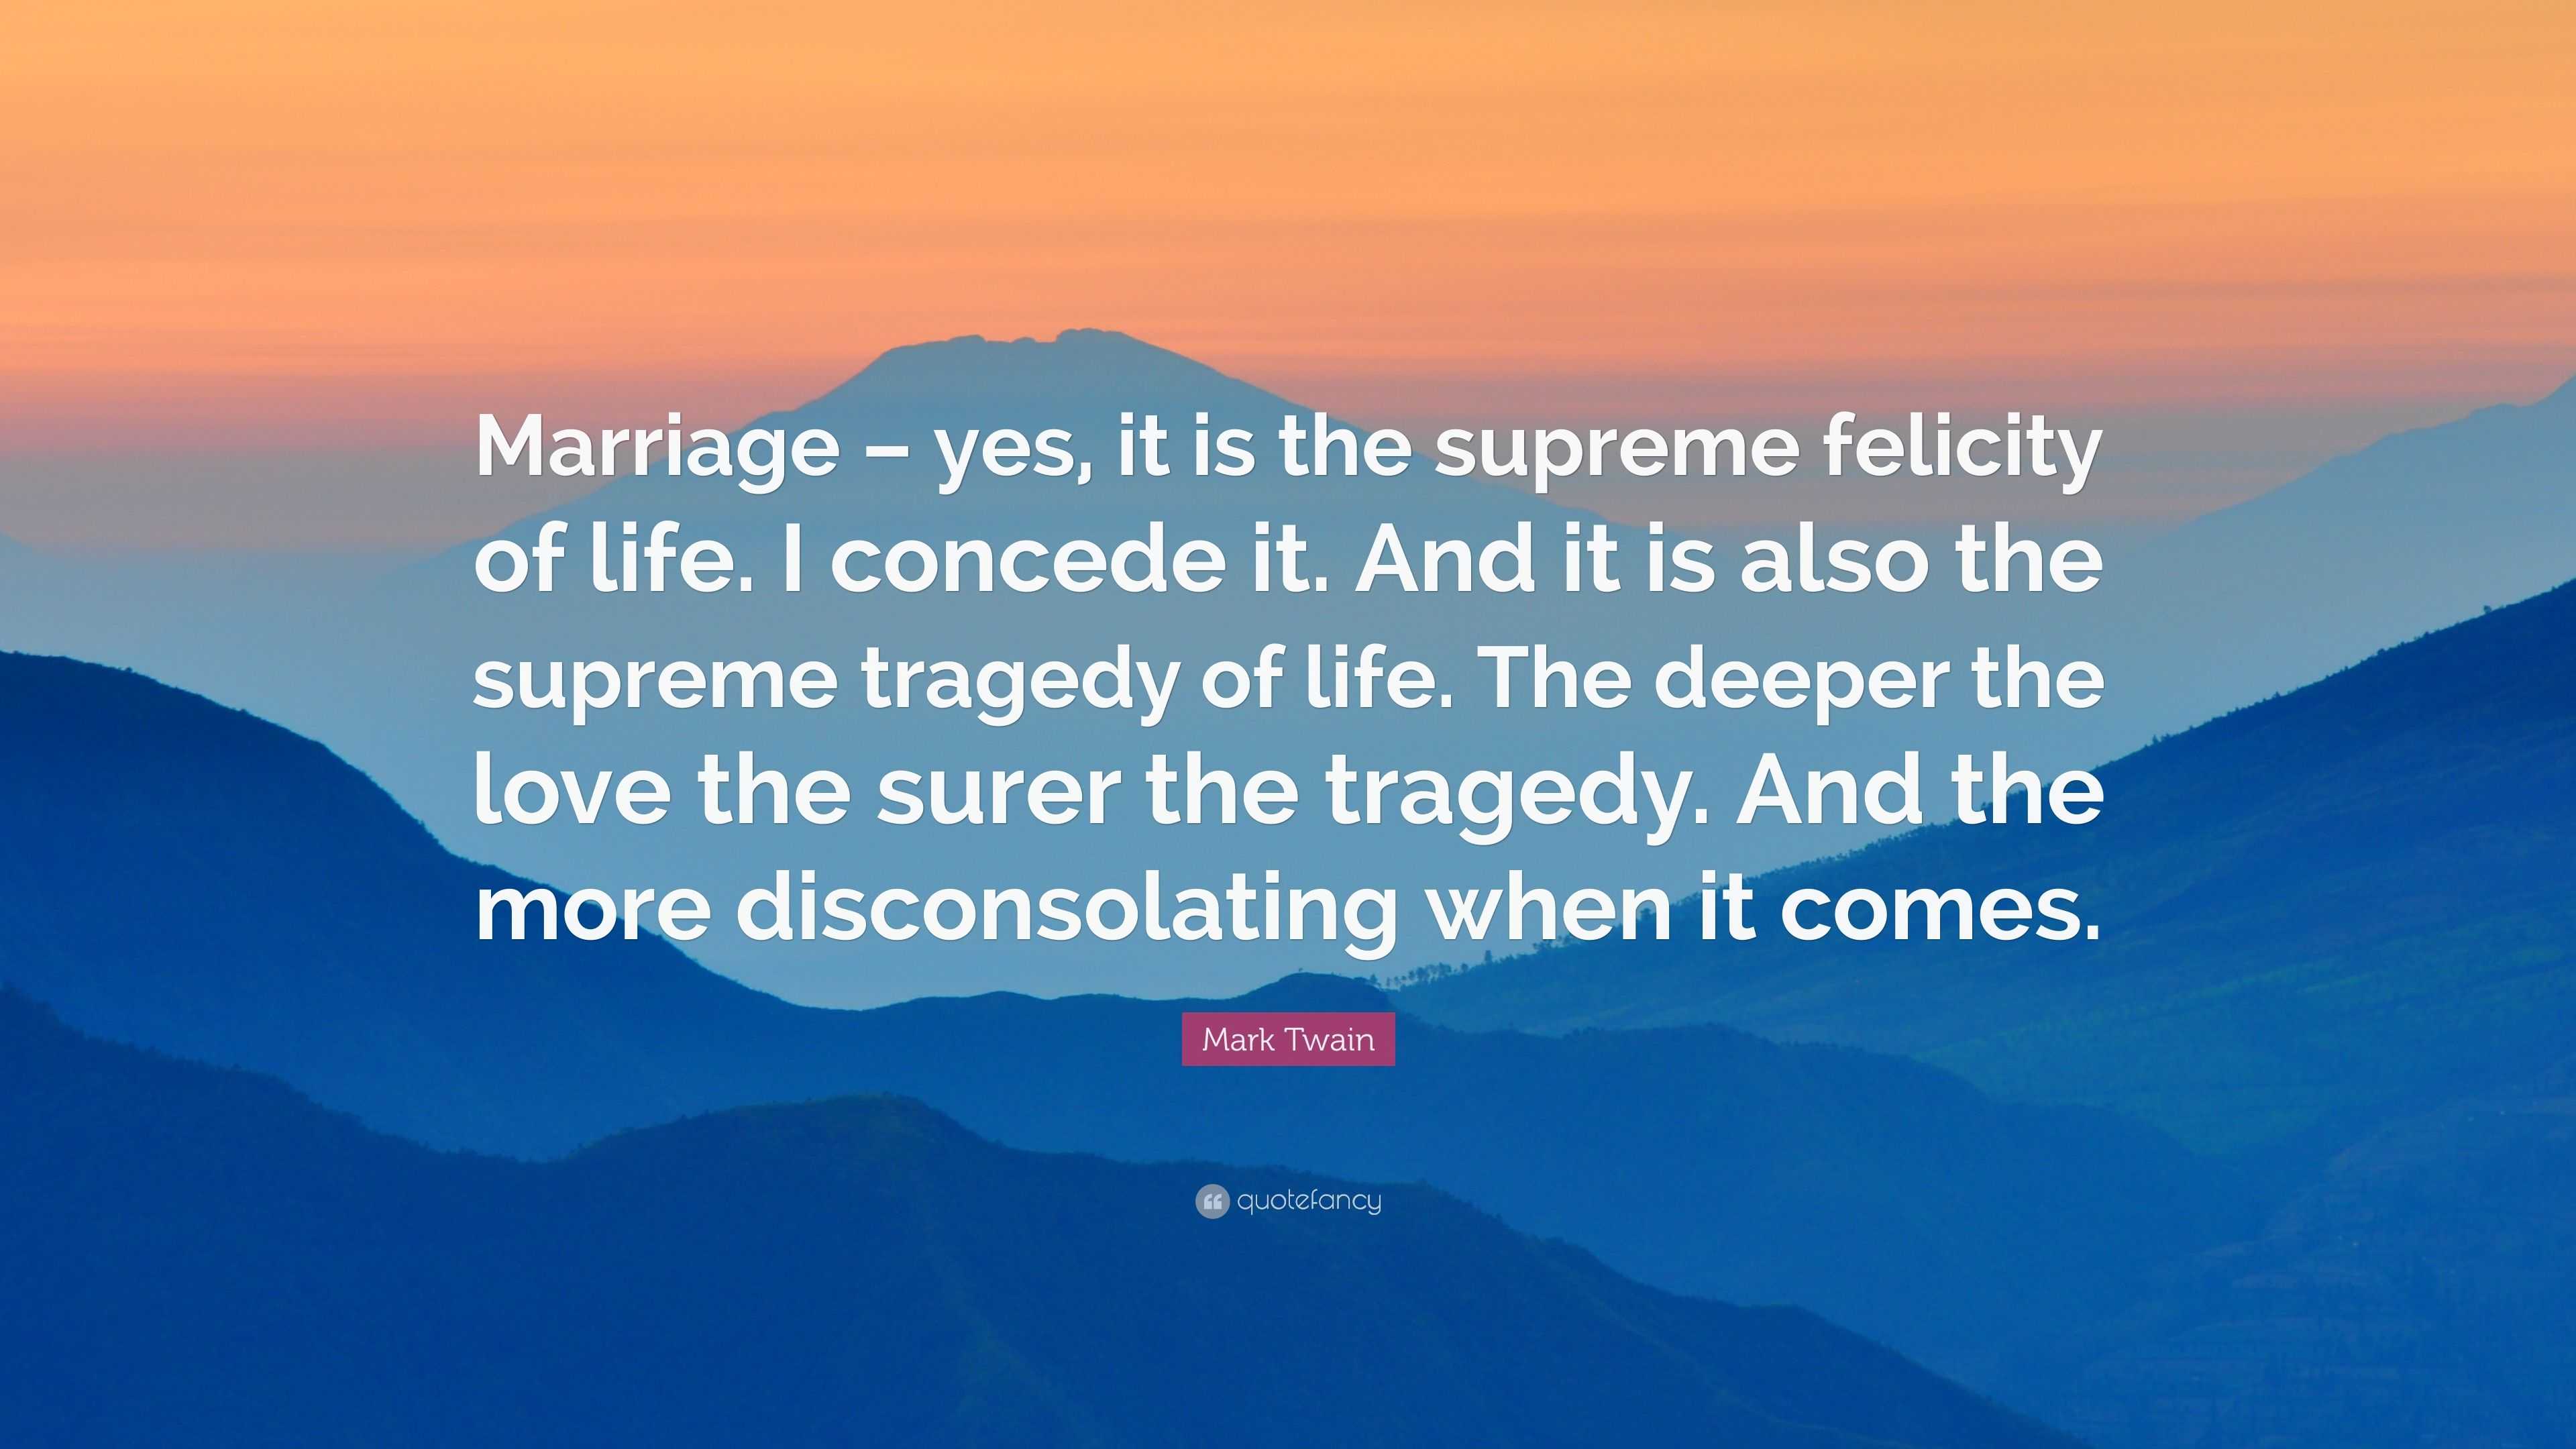 Mark Twain Quote “Marriage – yes it is the supreme felicity of life